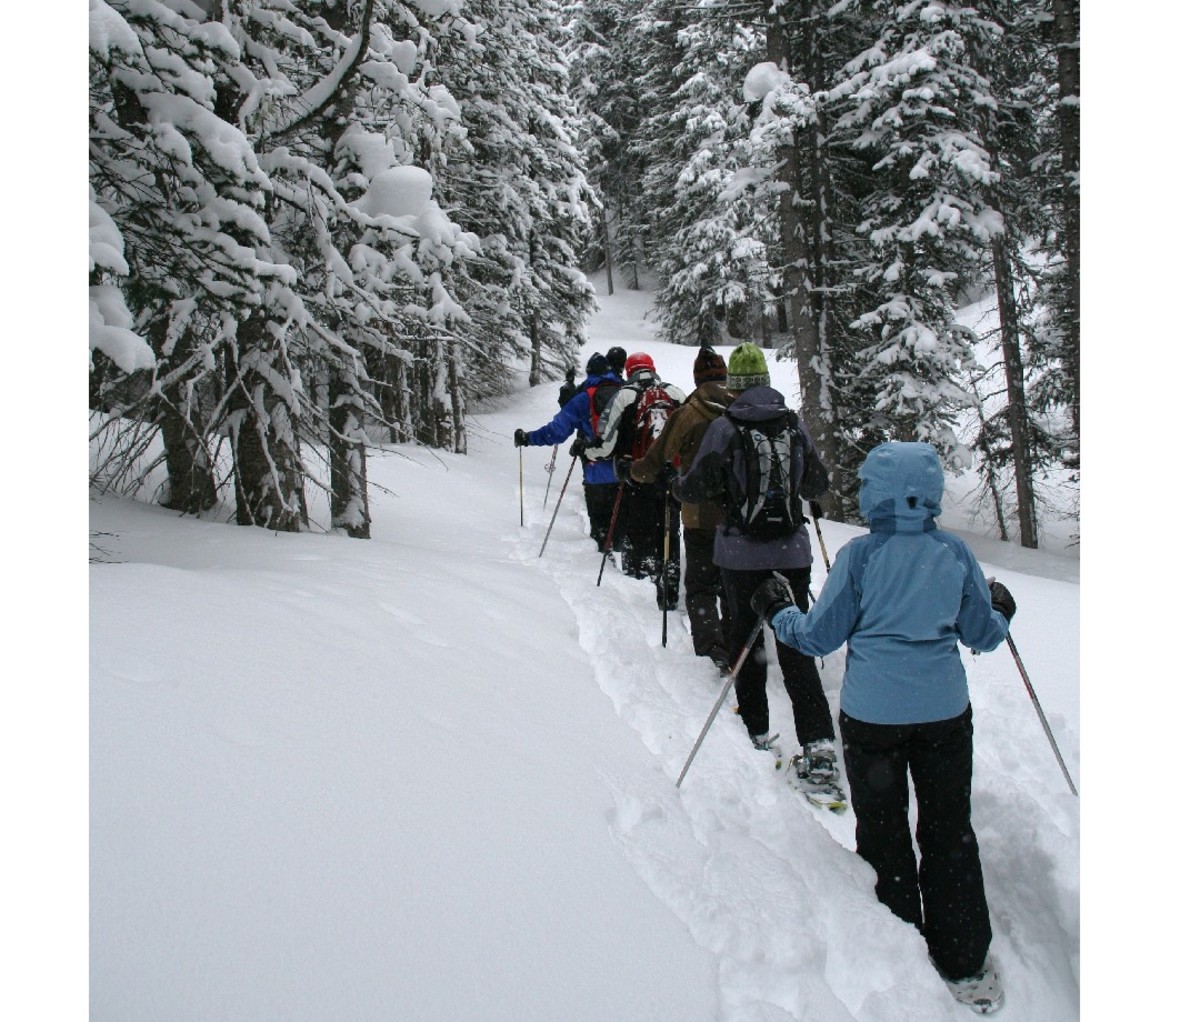 Snowshoe hikers in woods, Shrine pass, near Vail Pass.